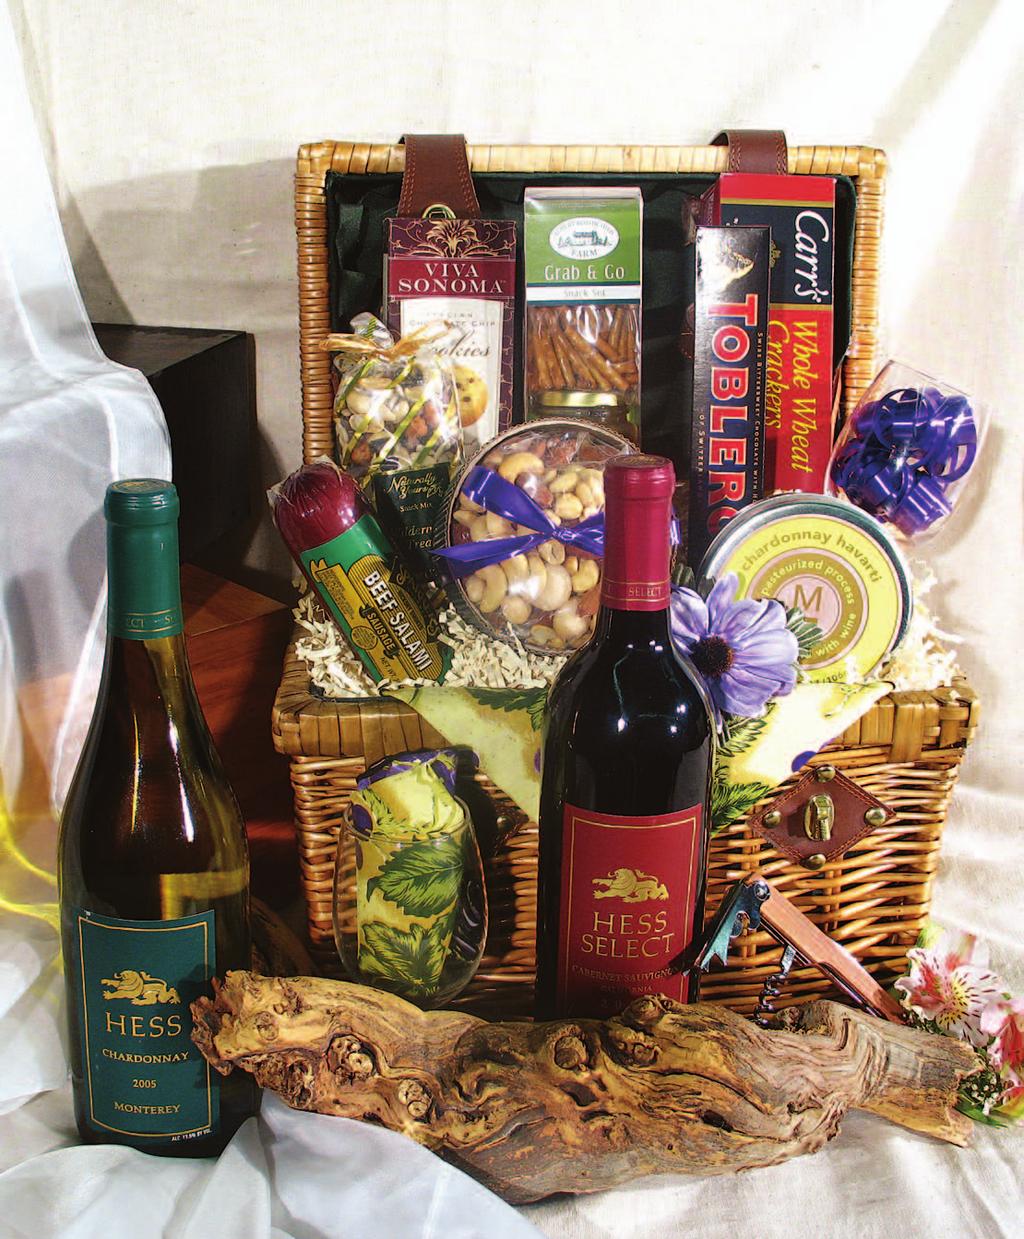 The Hess Ultimate Hamper This spectacular cloth-lined picnic hamper contains glassware, napkins and corkscrew.